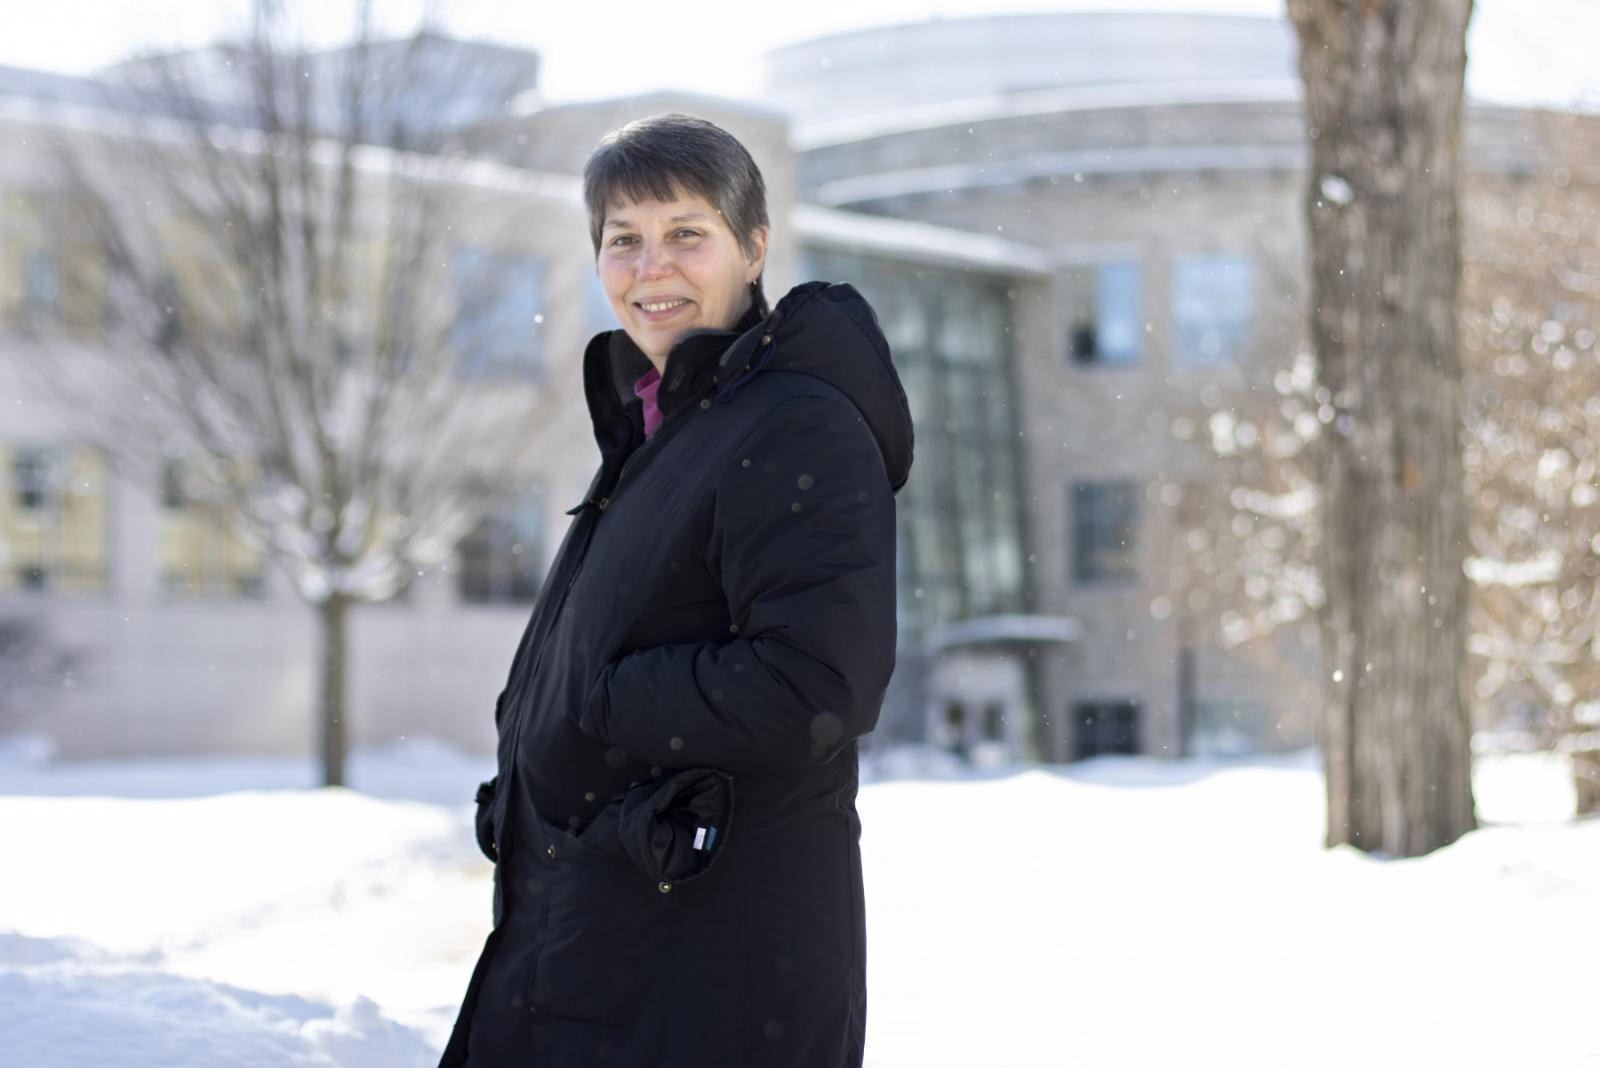 Nancy Wall poses for a portrait in winter on Main Hall Green.